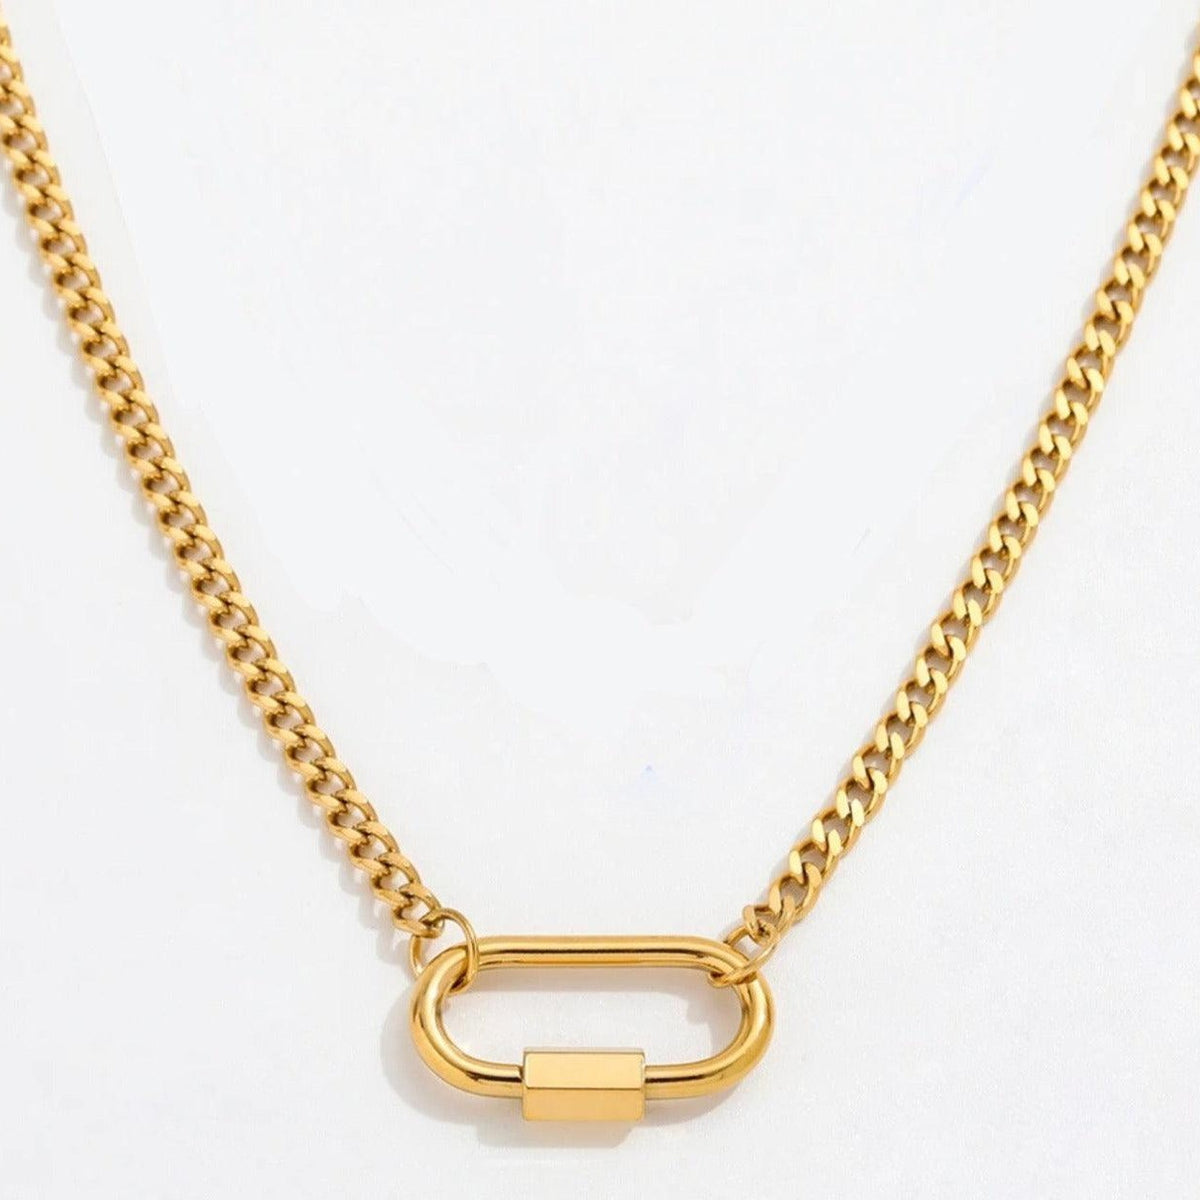 Lock Paperclip Chain Necklace Lock Chain Link Necklace Lock 